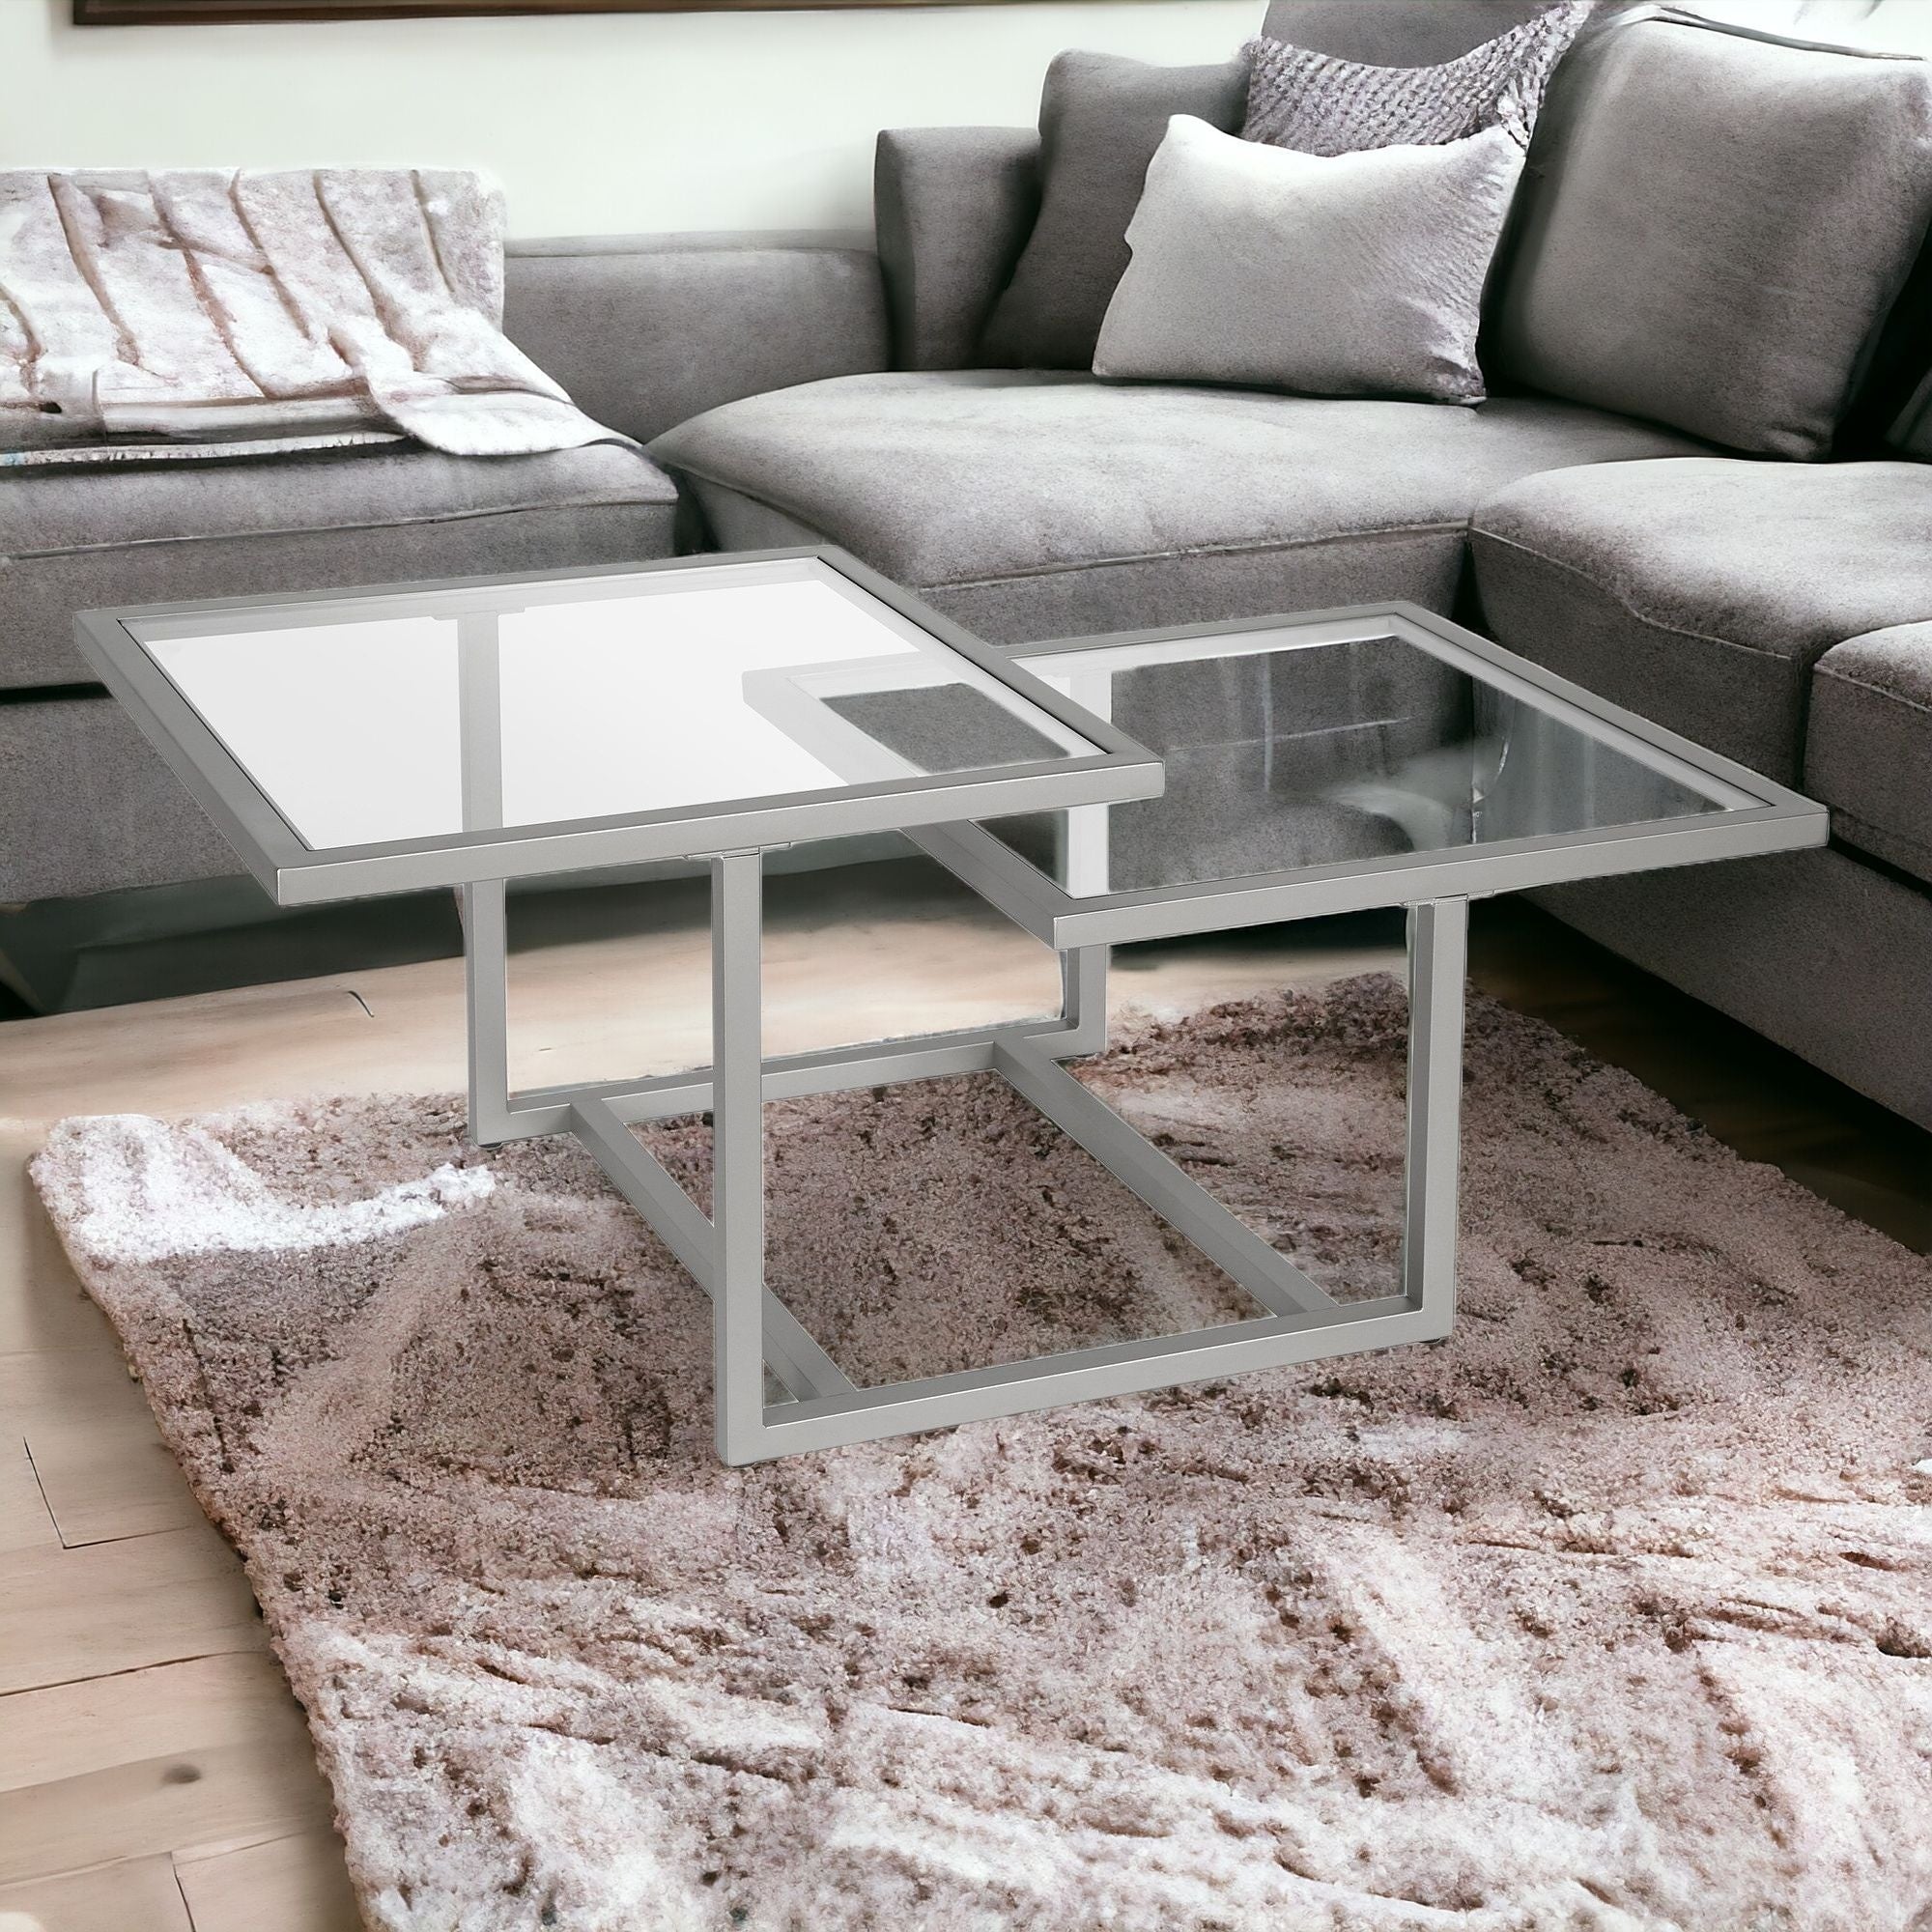 43" Silver Glass And Steel Square Coffee Table With Two Shelves